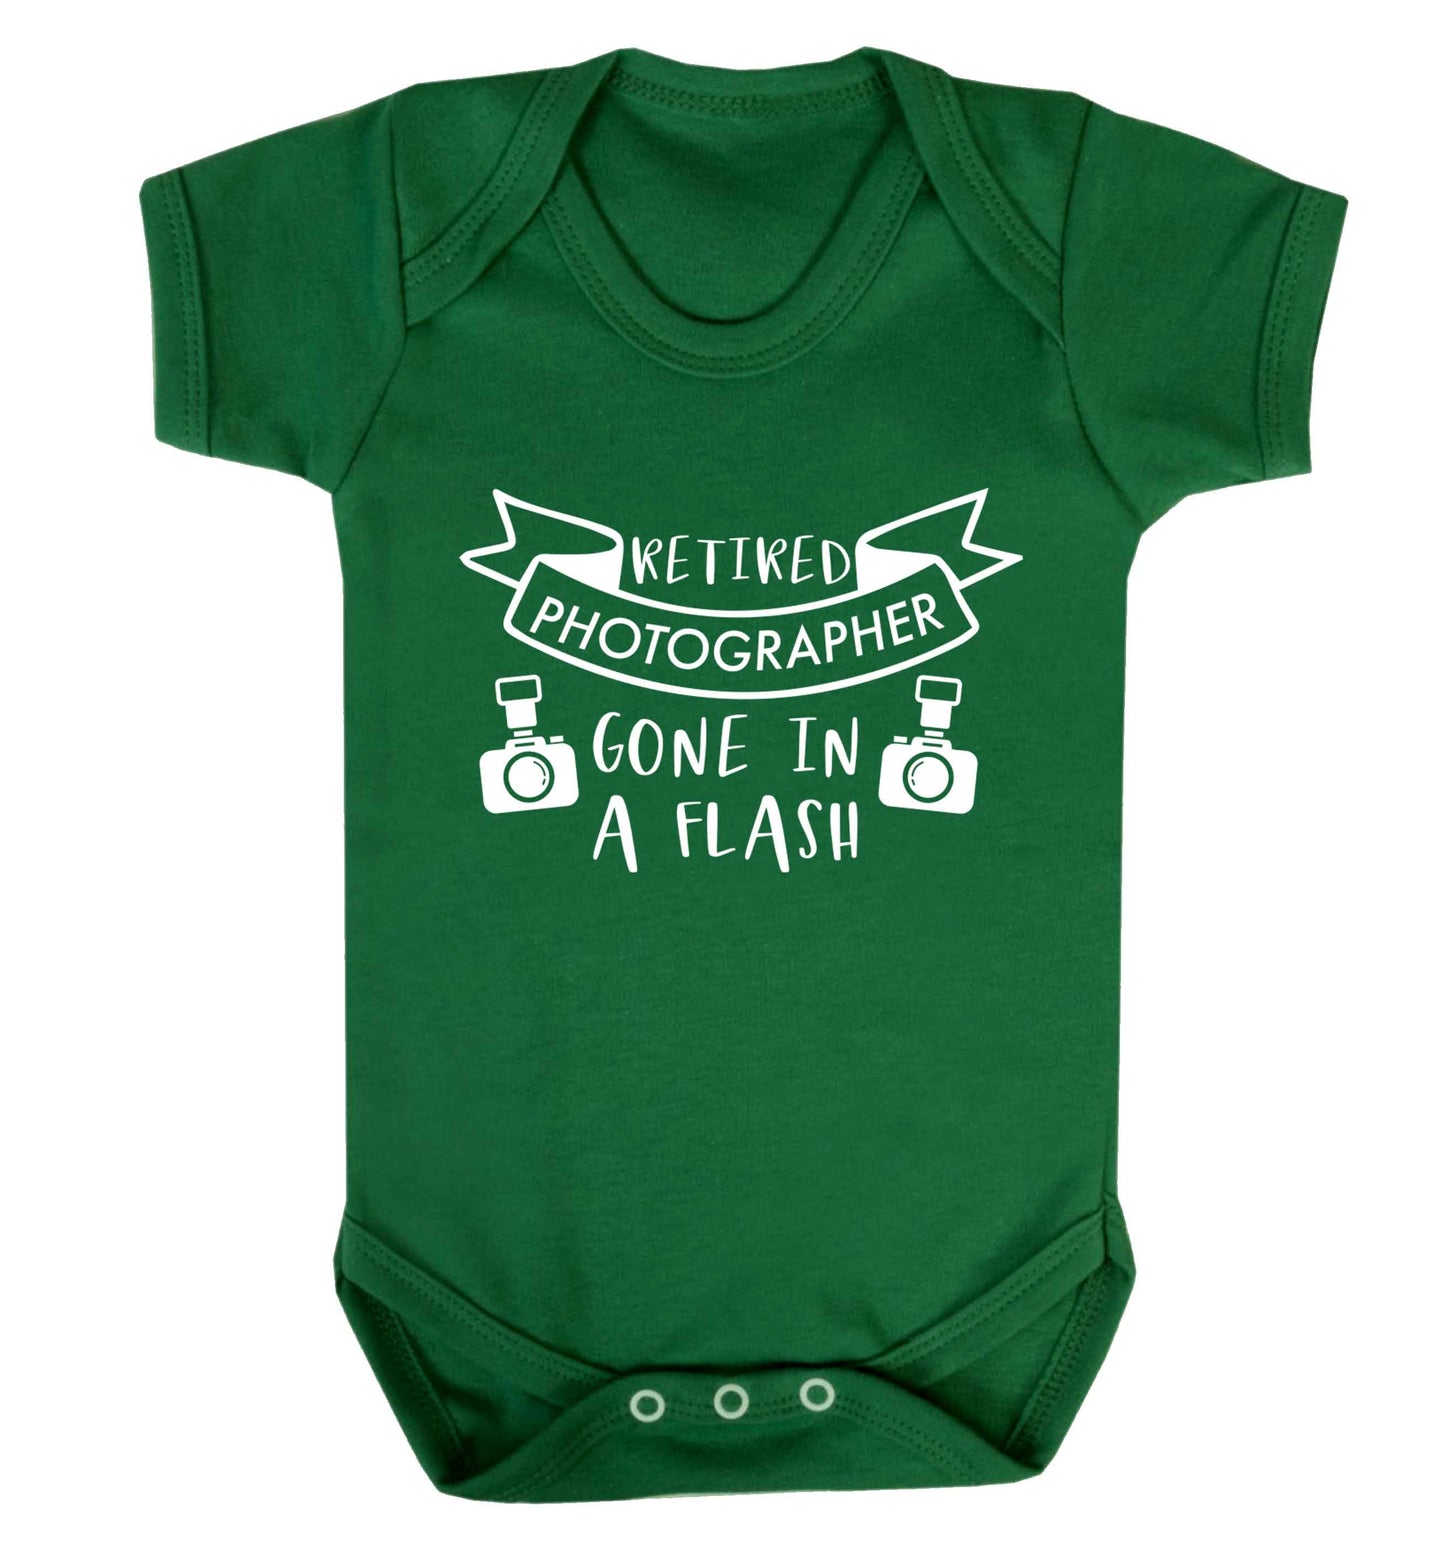 Retired photographer gone in a flash Baby Vest green 18-24 months